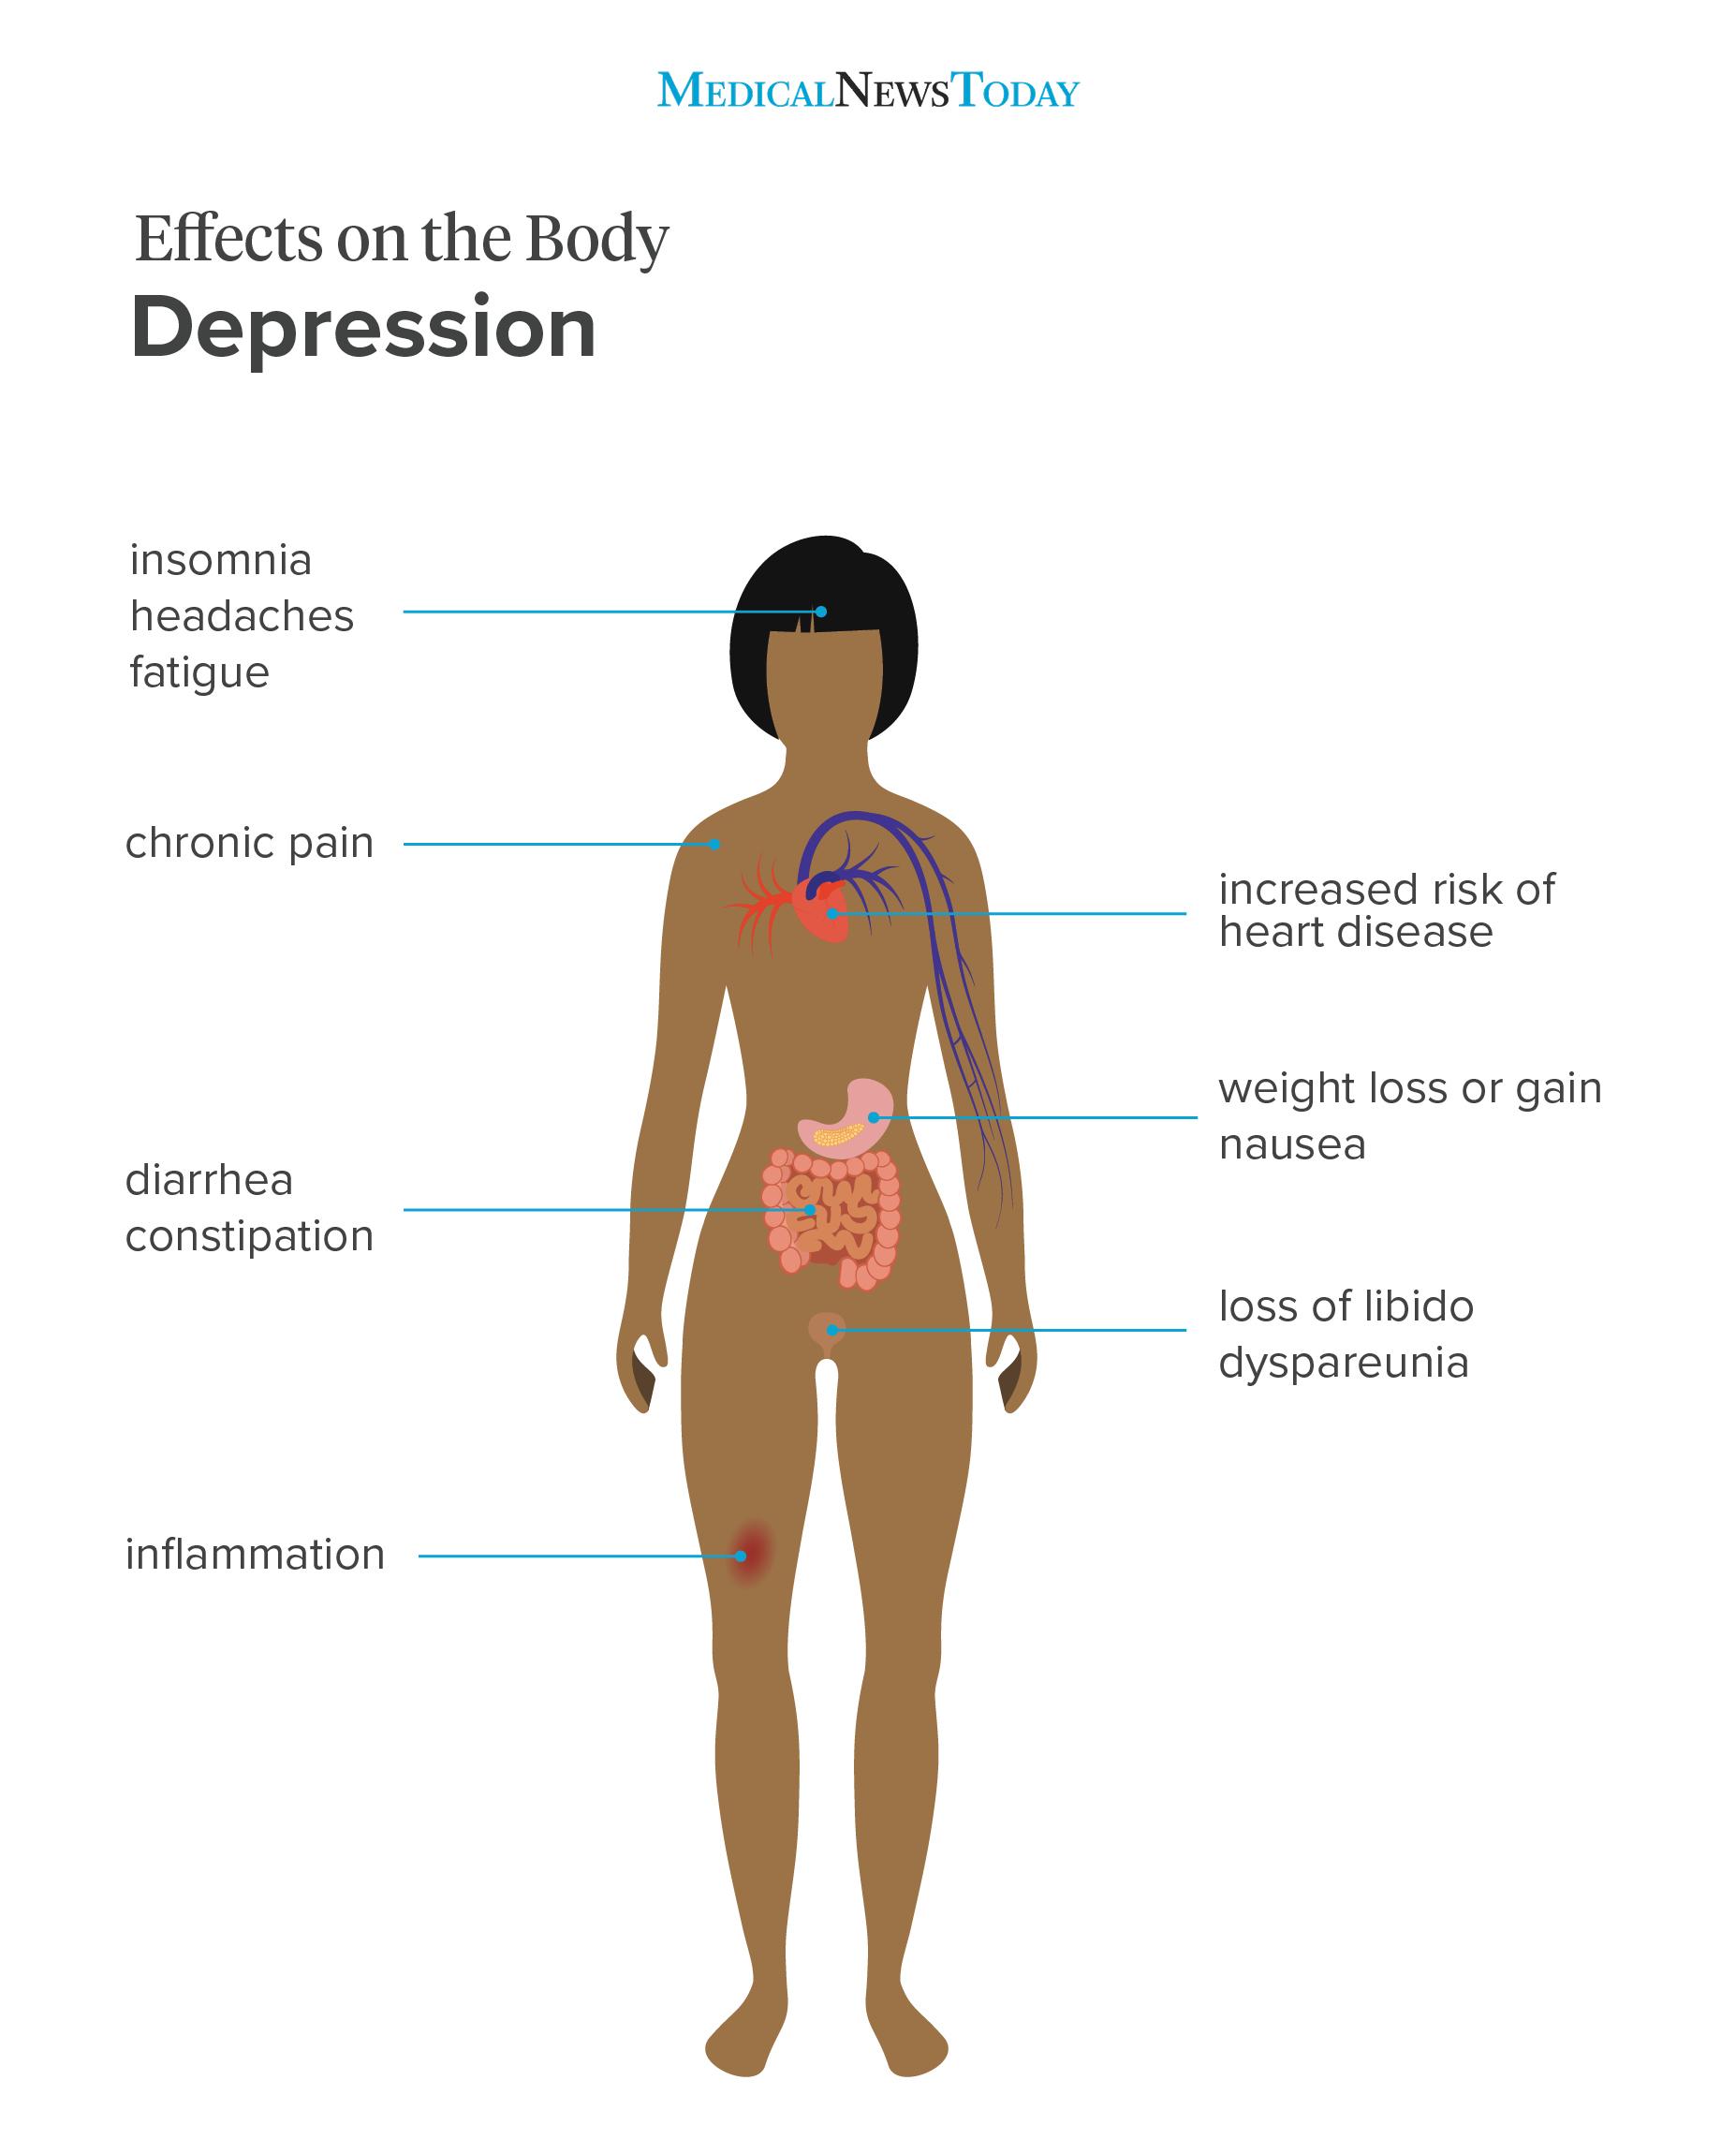 The effects of depression on the body and physical health